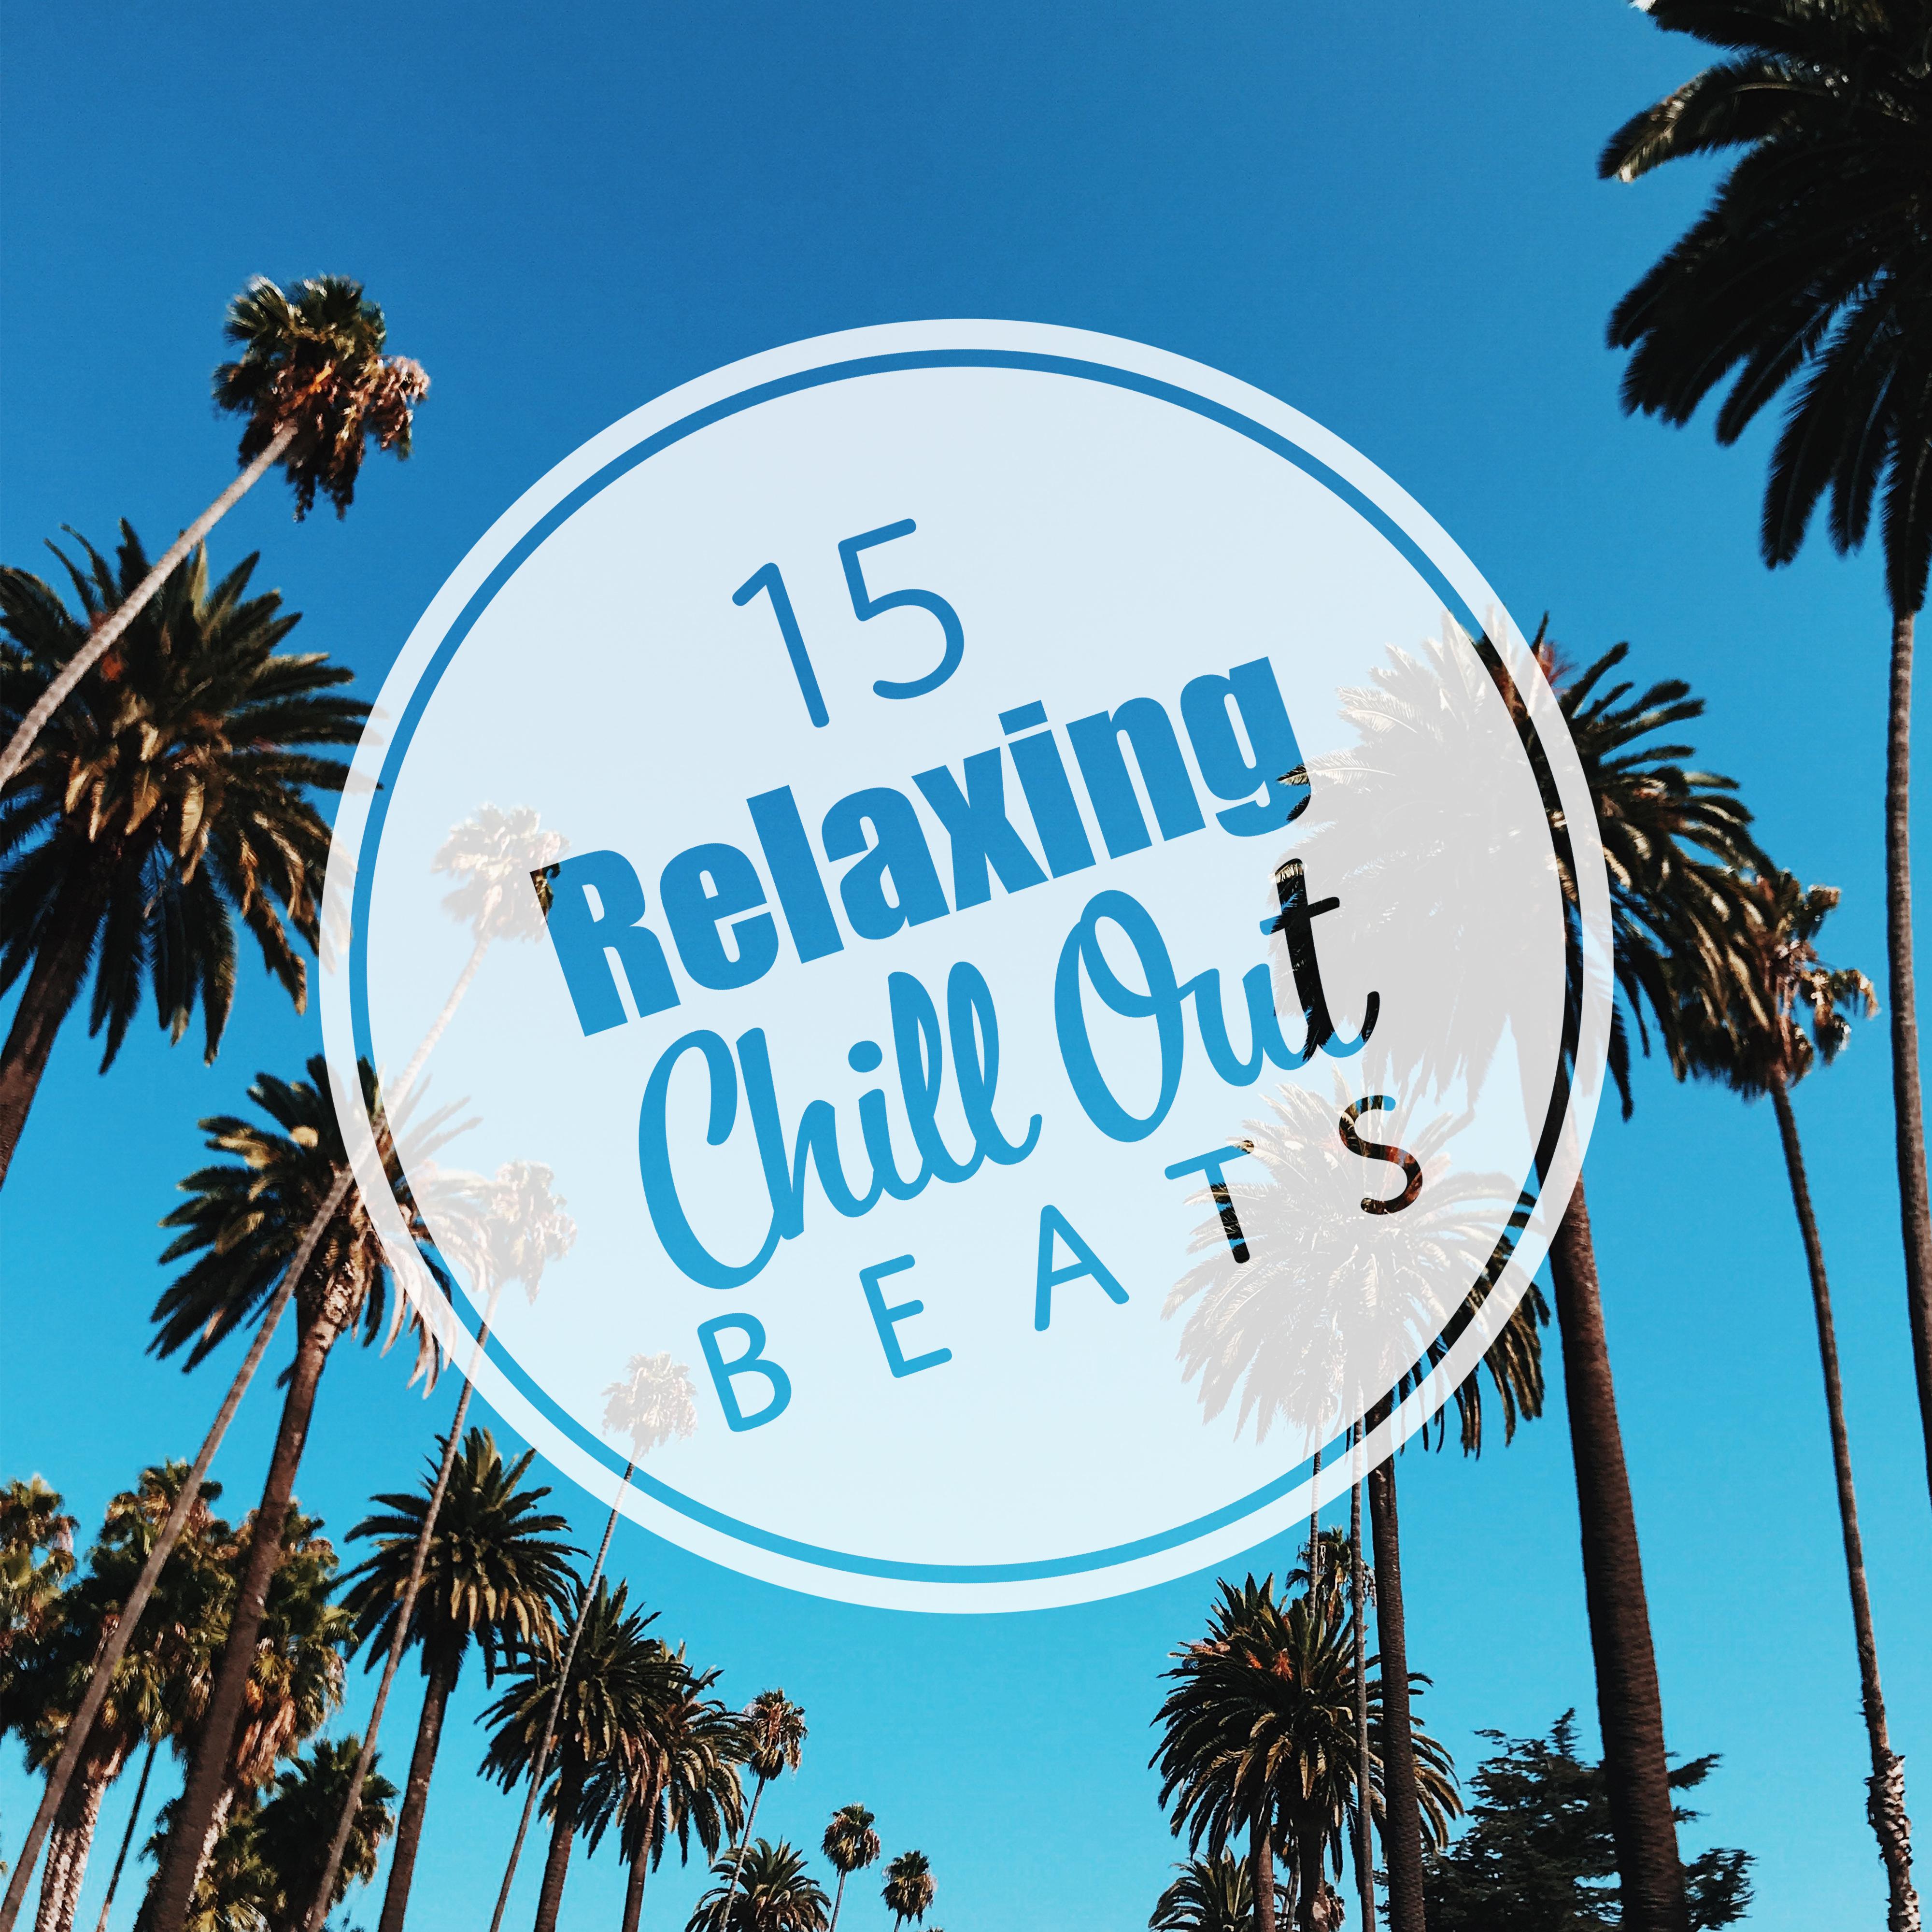 15 Relaxing Chill Out Beats